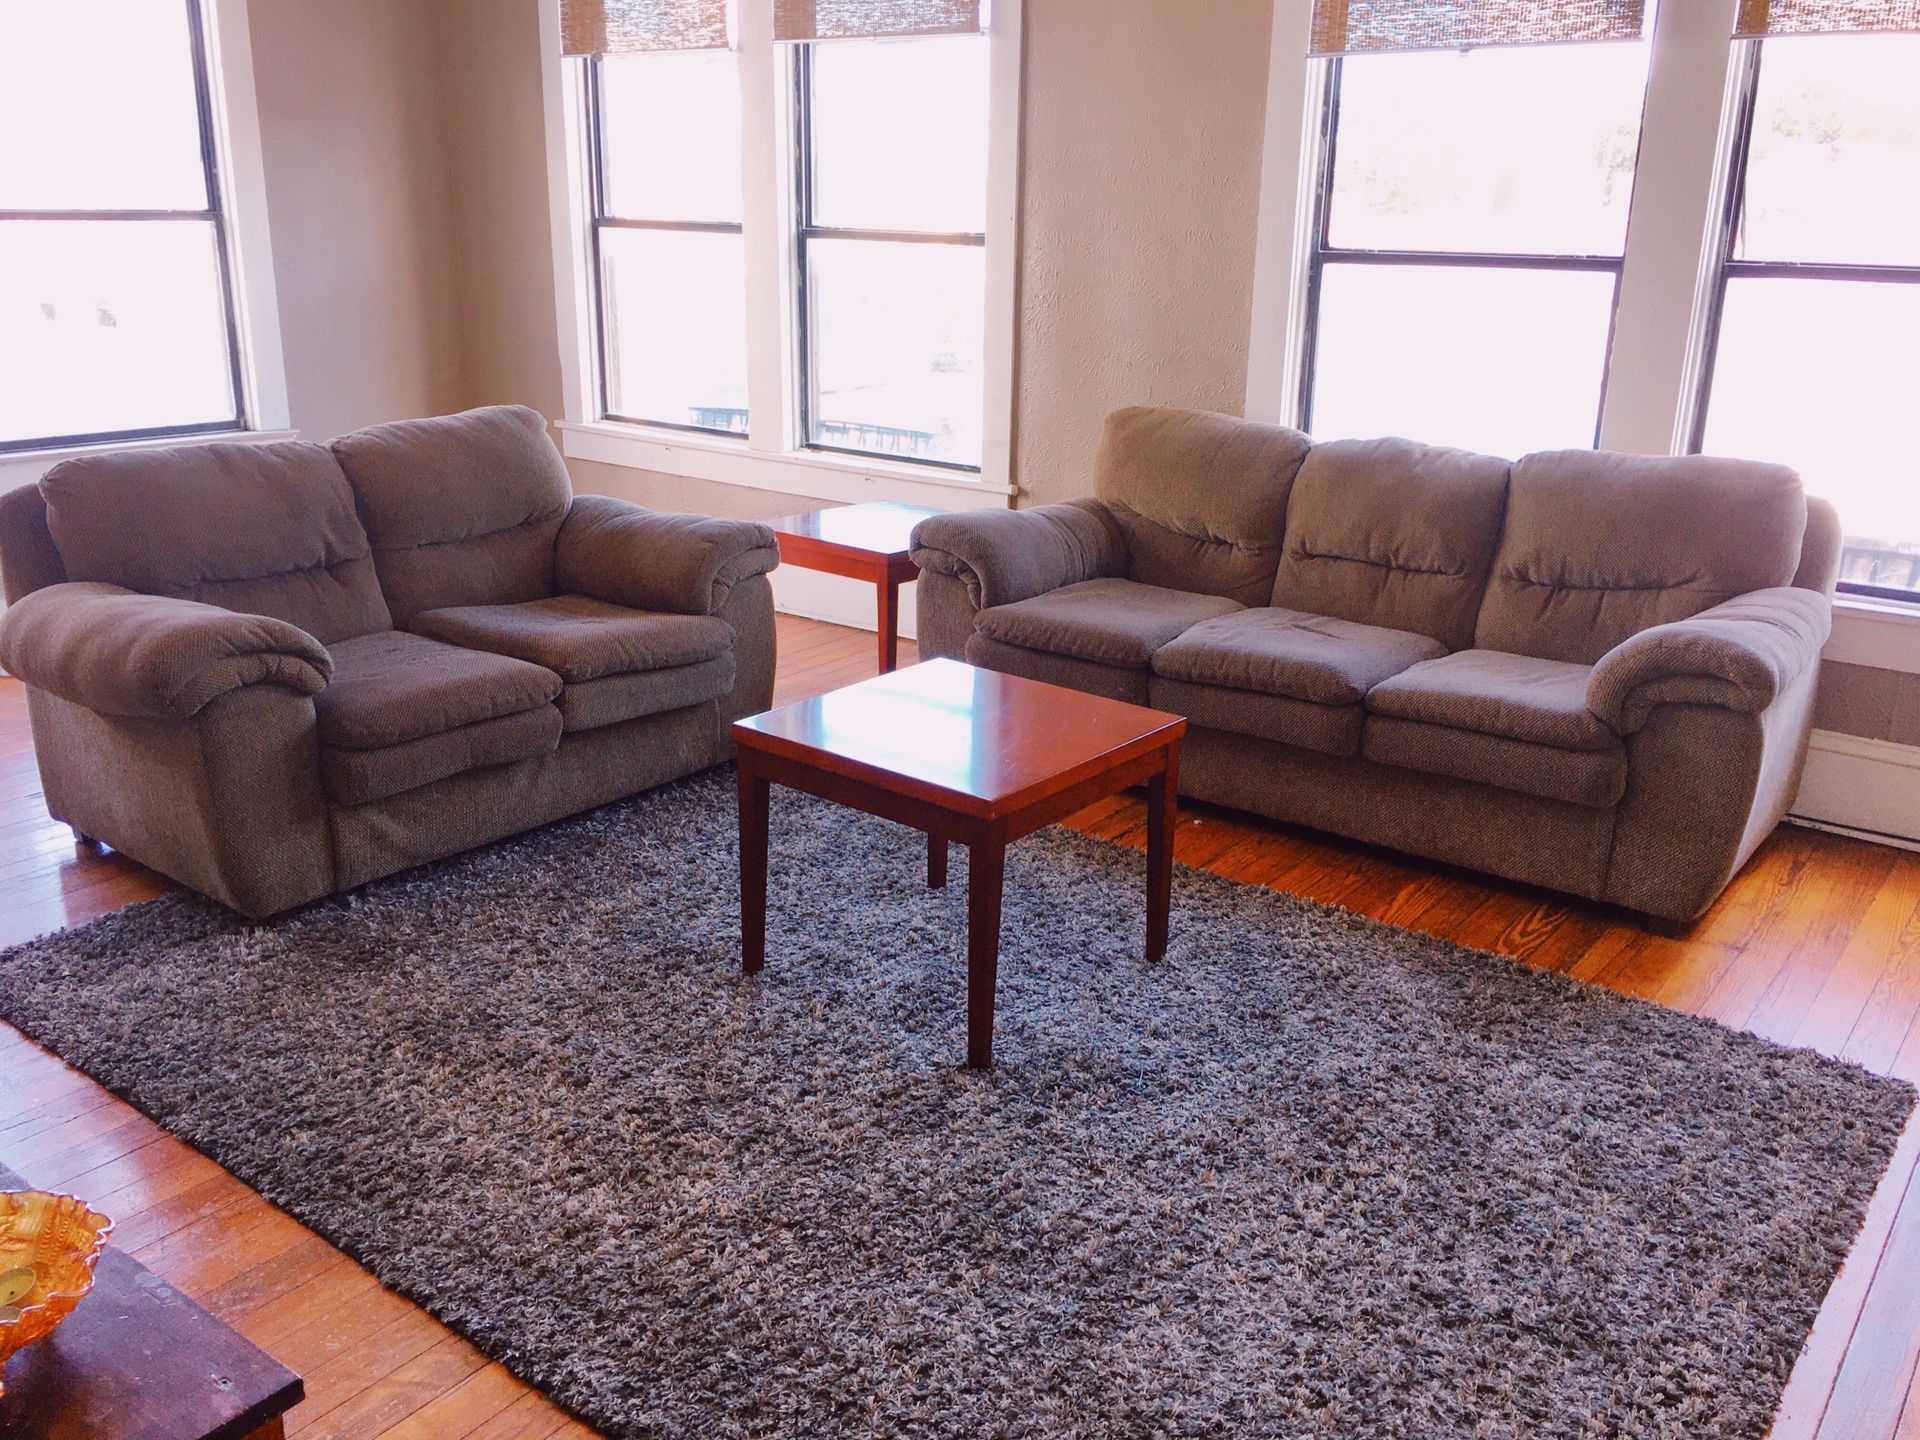 Living Room Furnature Set (matching Couches, Coffee Tables, Carpet, & TV Stand)